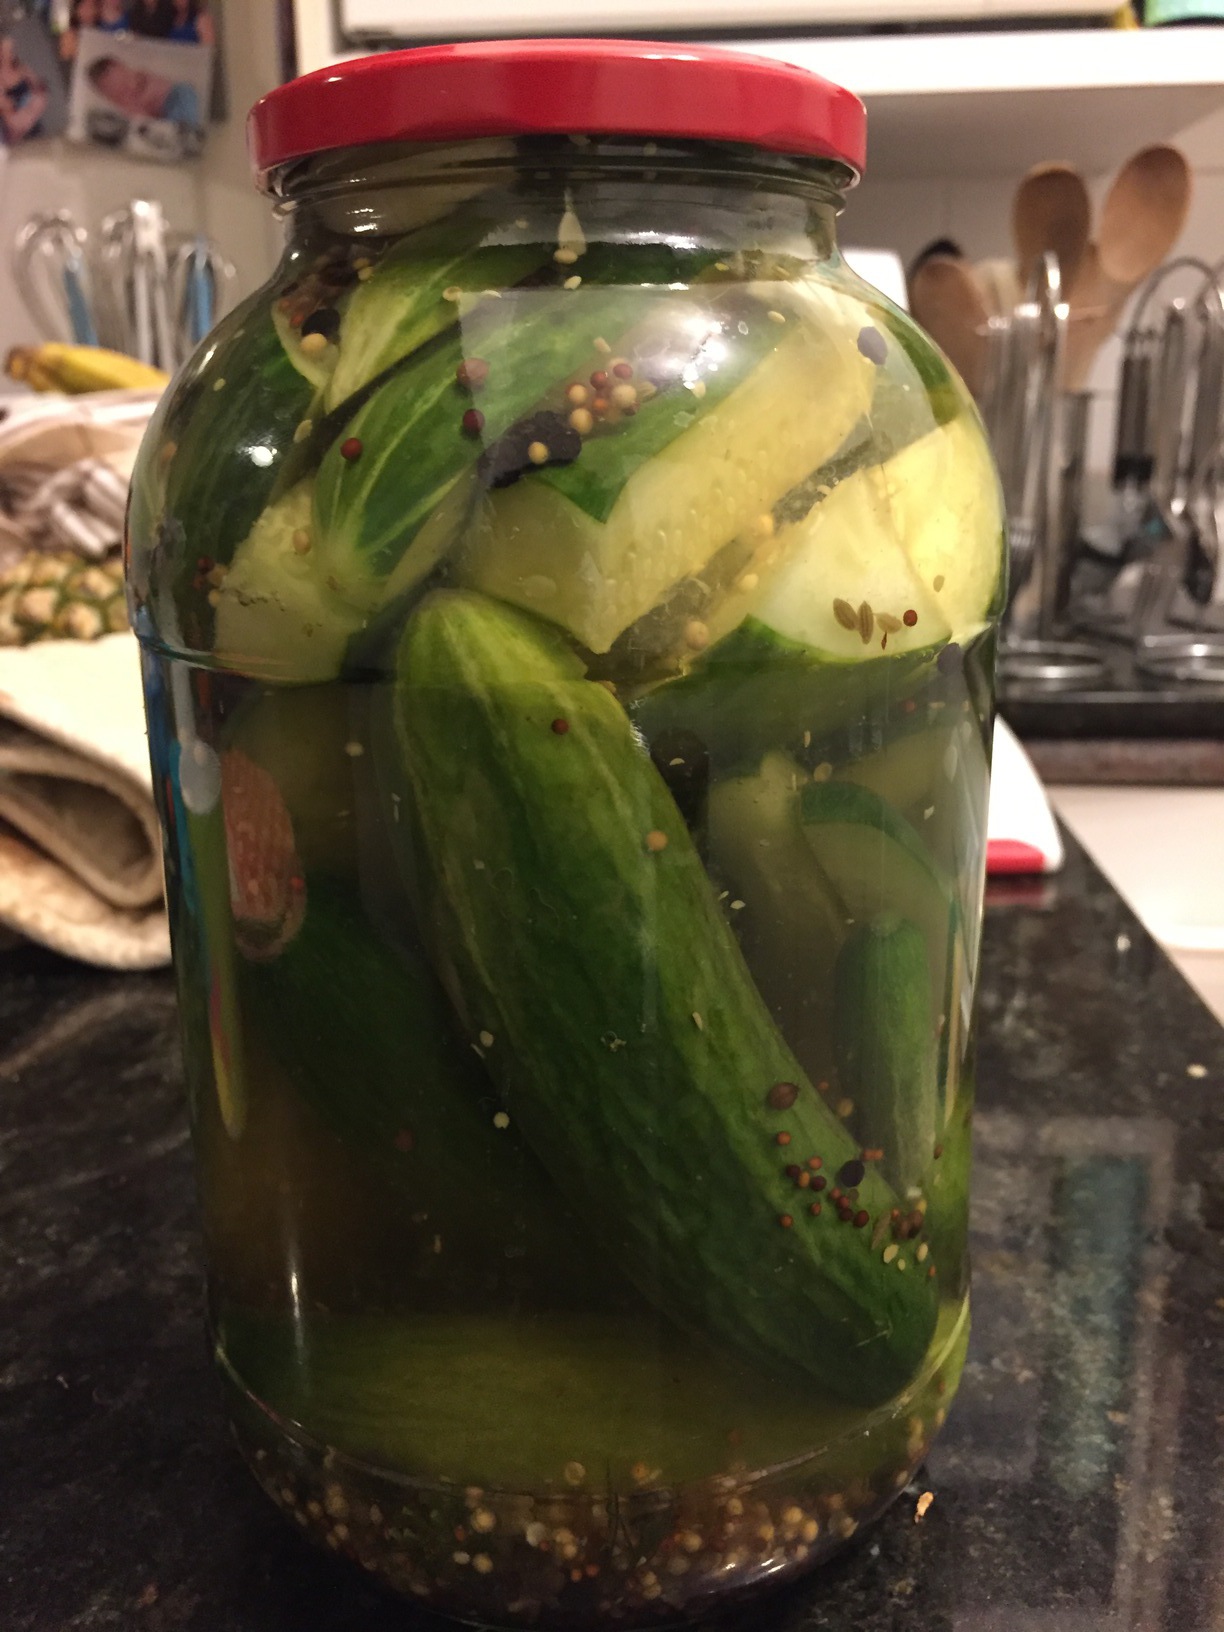 Freshly pickled cucumbers, ready to eat in 2-3 weeks. These were pickled in 12-JAN-2018, and they're still good. Not sure how long they are meant to last...